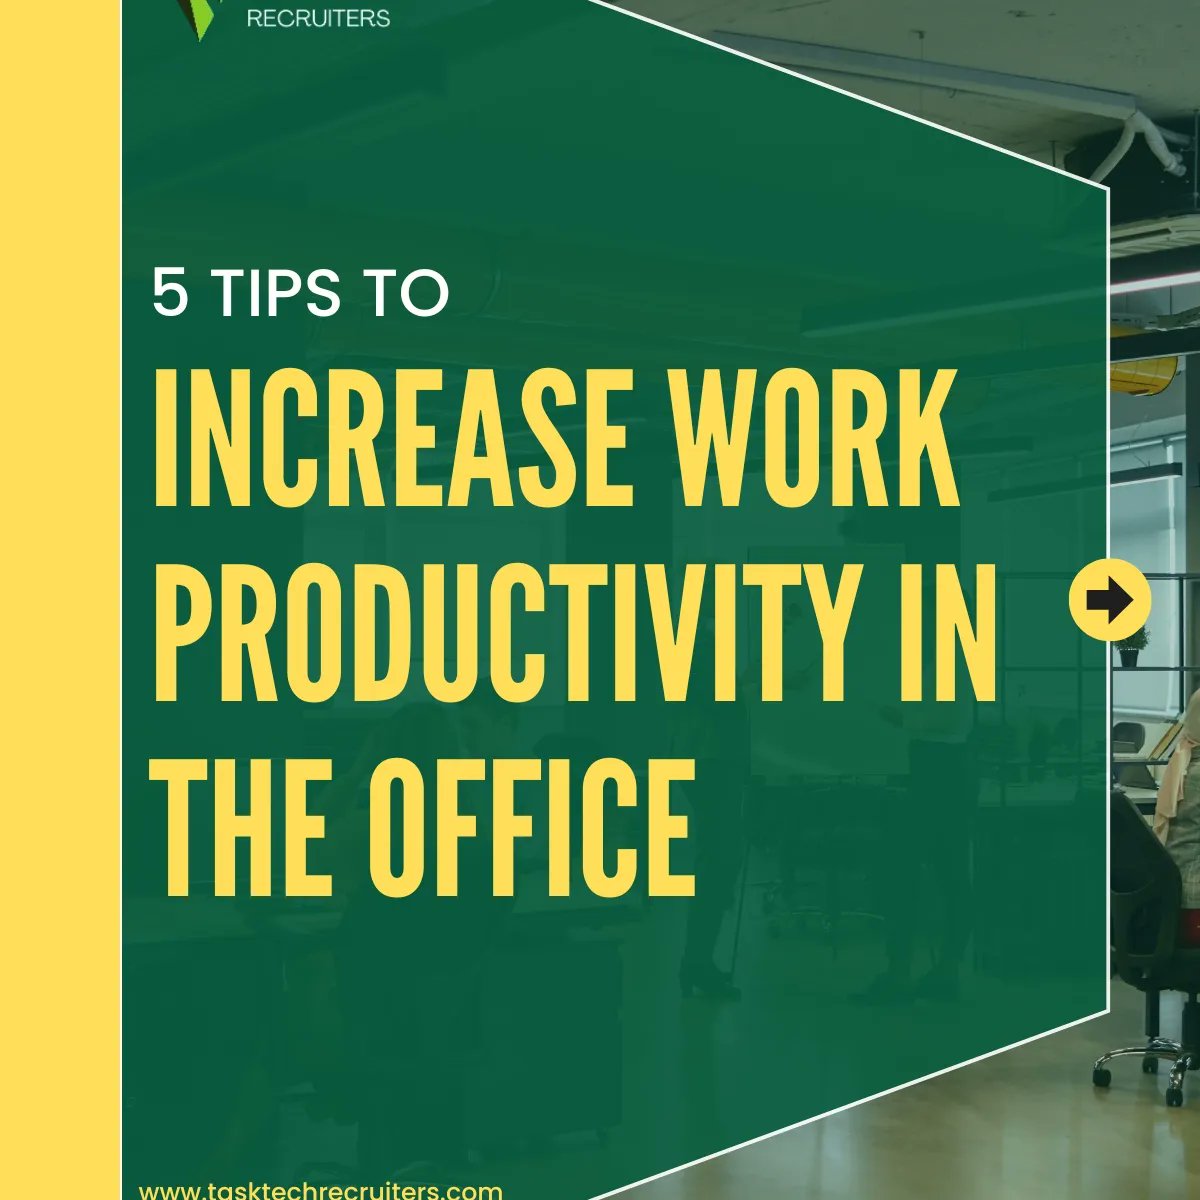 5 tips to increase work productivity in the office .

 #ProductivityTips #OfficeEfficiency #WorkplaceSuccess #TeamProductivity #TimeManagement #TaskPrioritization #FeedbackCulture #WorkspaceOrganization #ProfessionalGrowth #TeamCollaboration